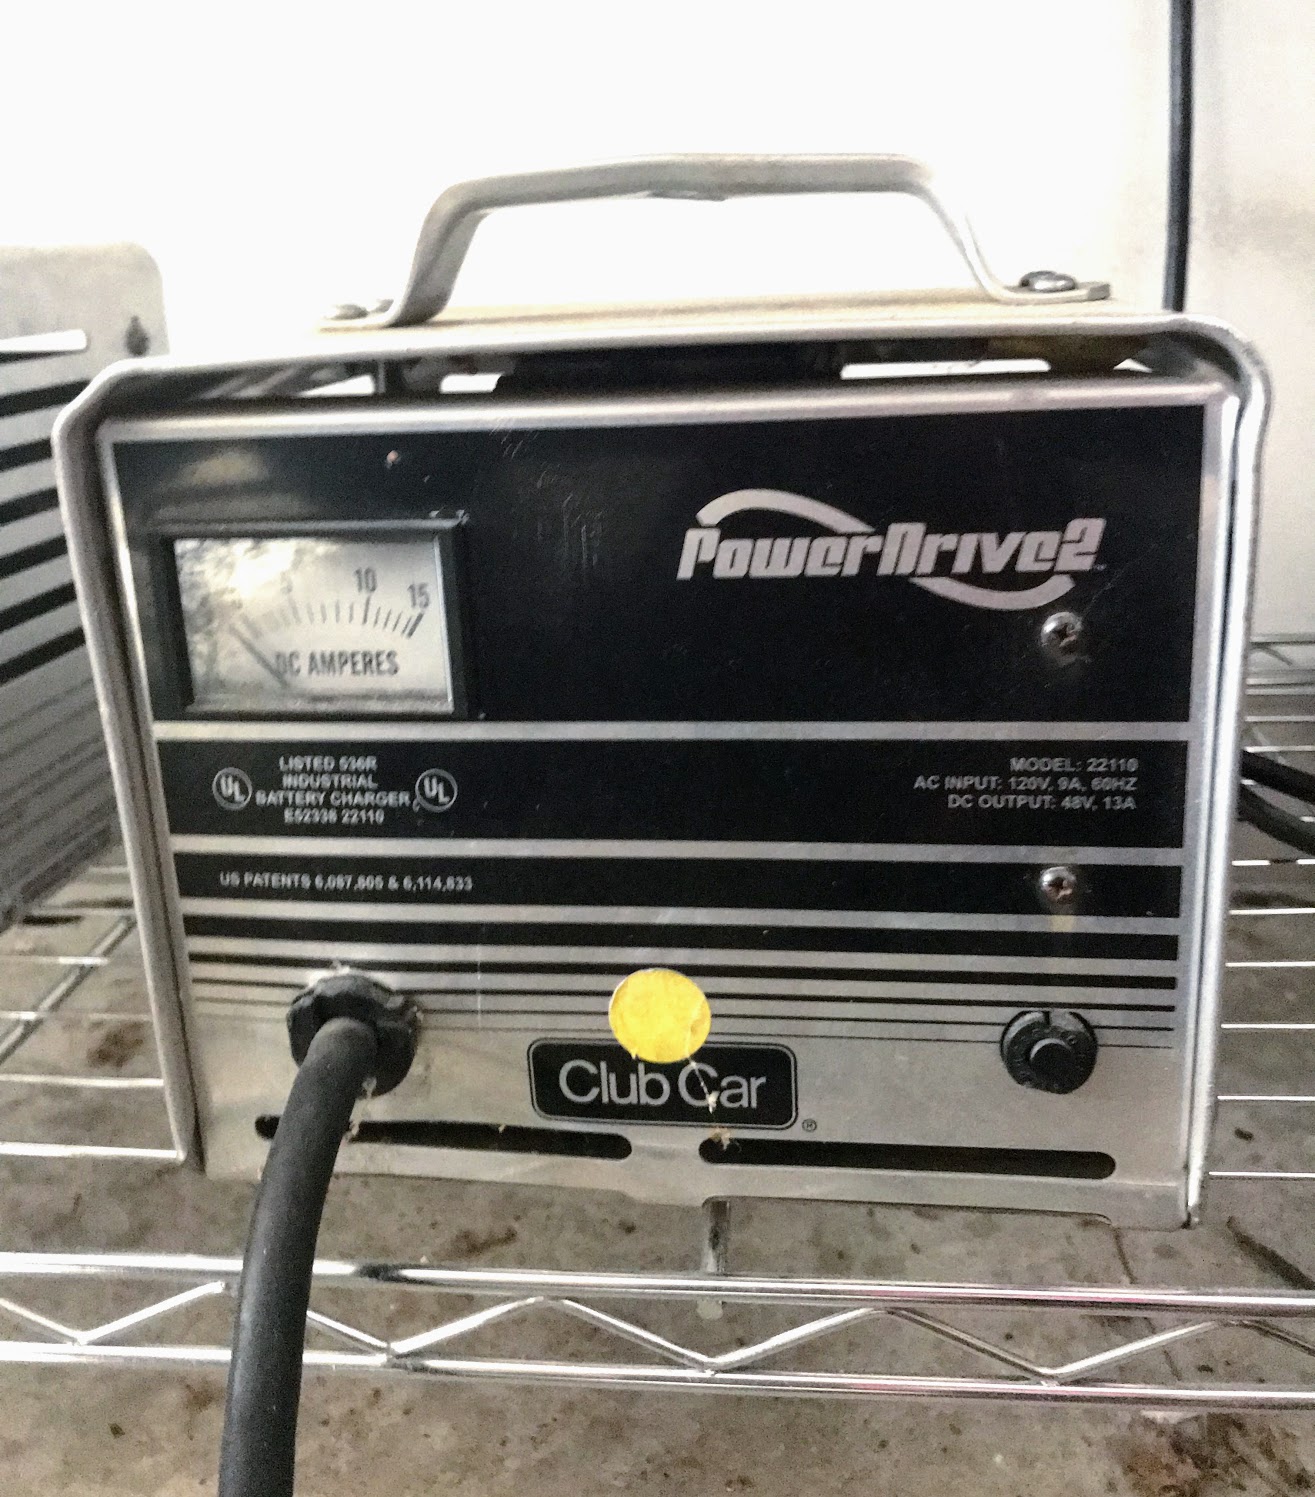 Club Car Battery Charger - When Is It Time to Replace Your Charger?